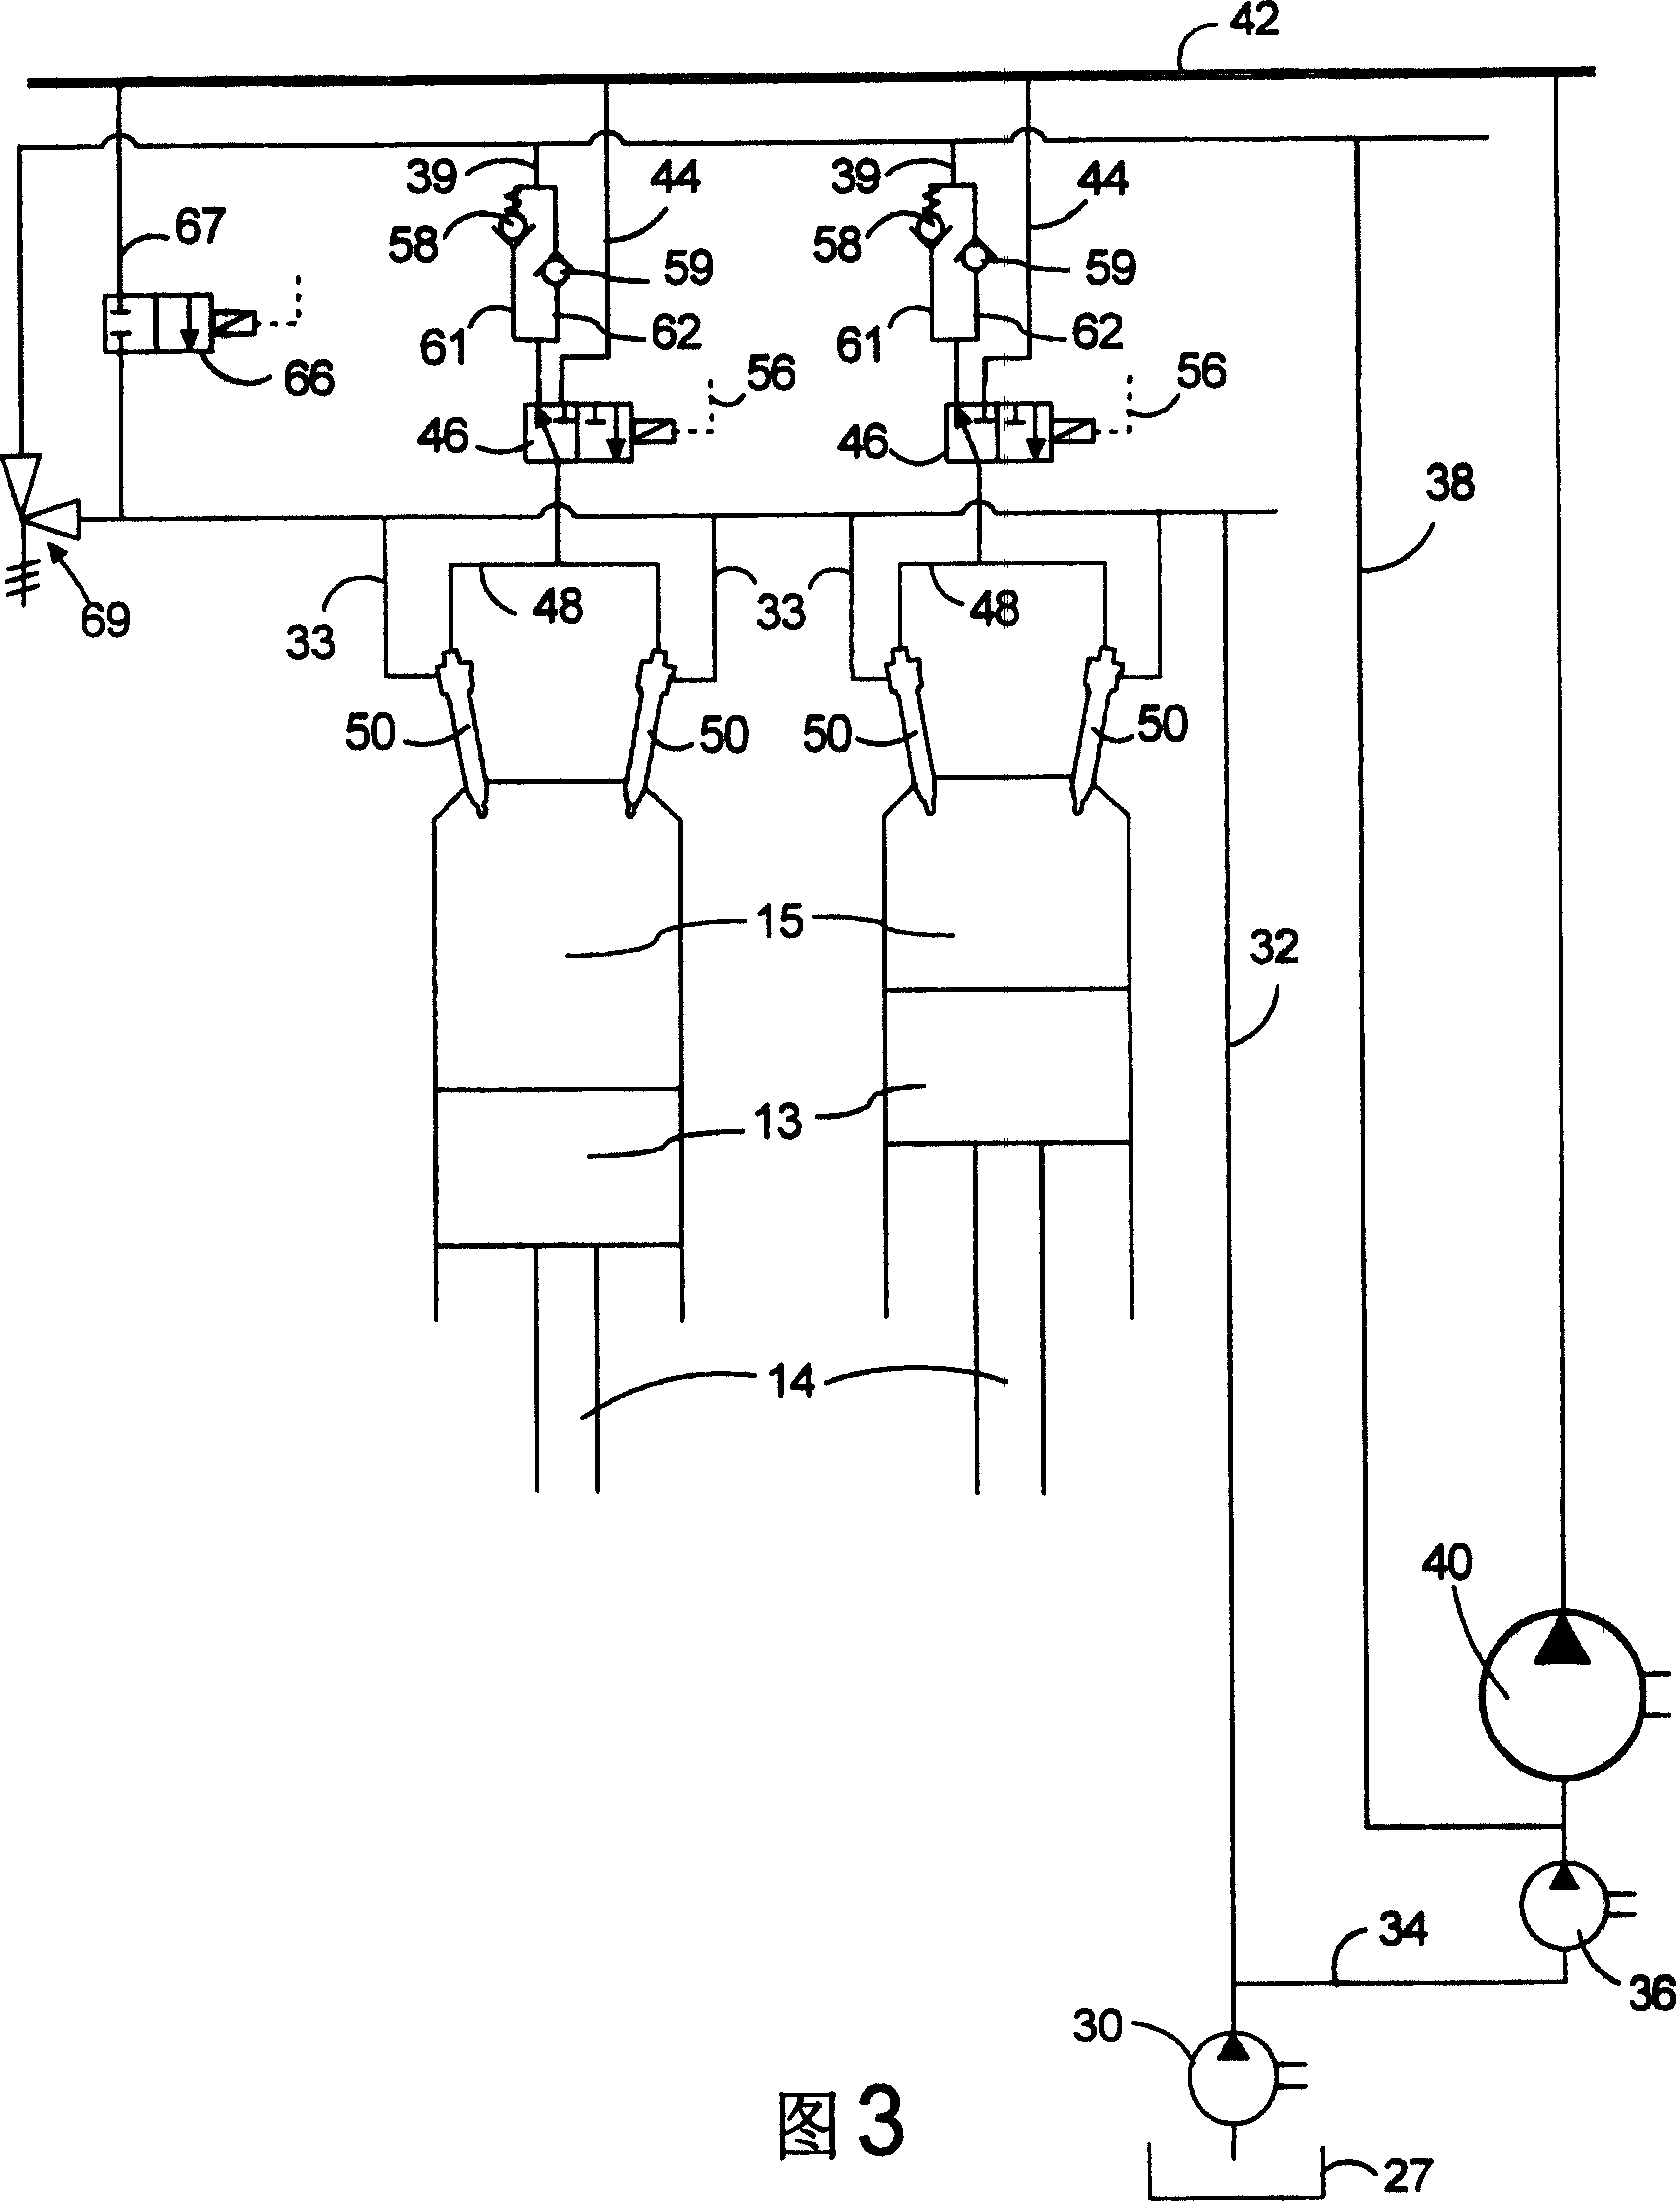 Common rail fuel injection system with fuel circulation for a large two-stroke diesel engine